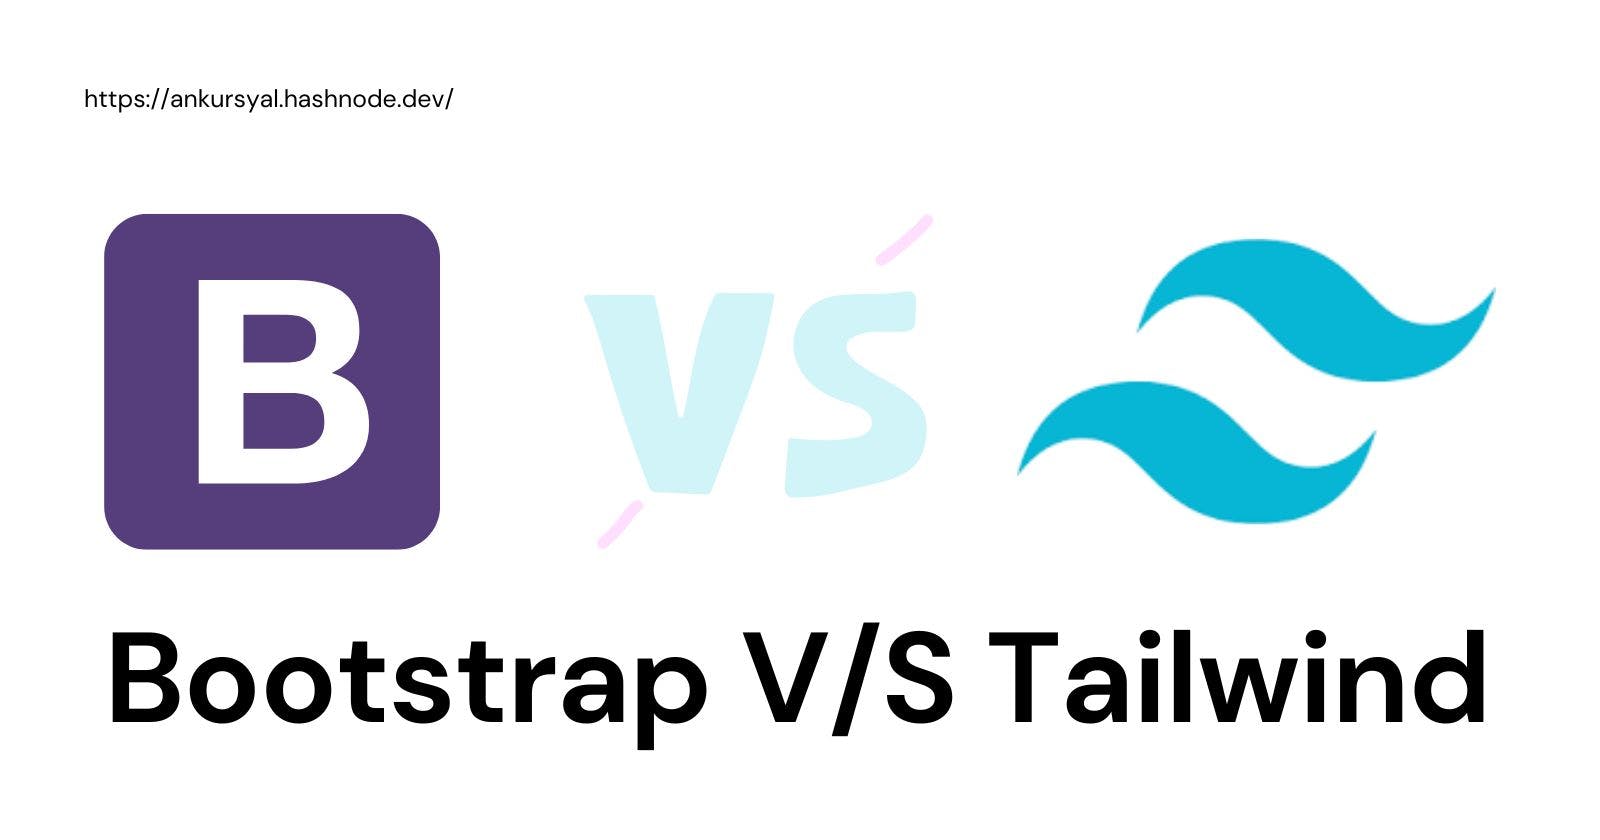 Bootstrap or Tailwind: Which One Will Give You the Best ROI on Your Web Projects?